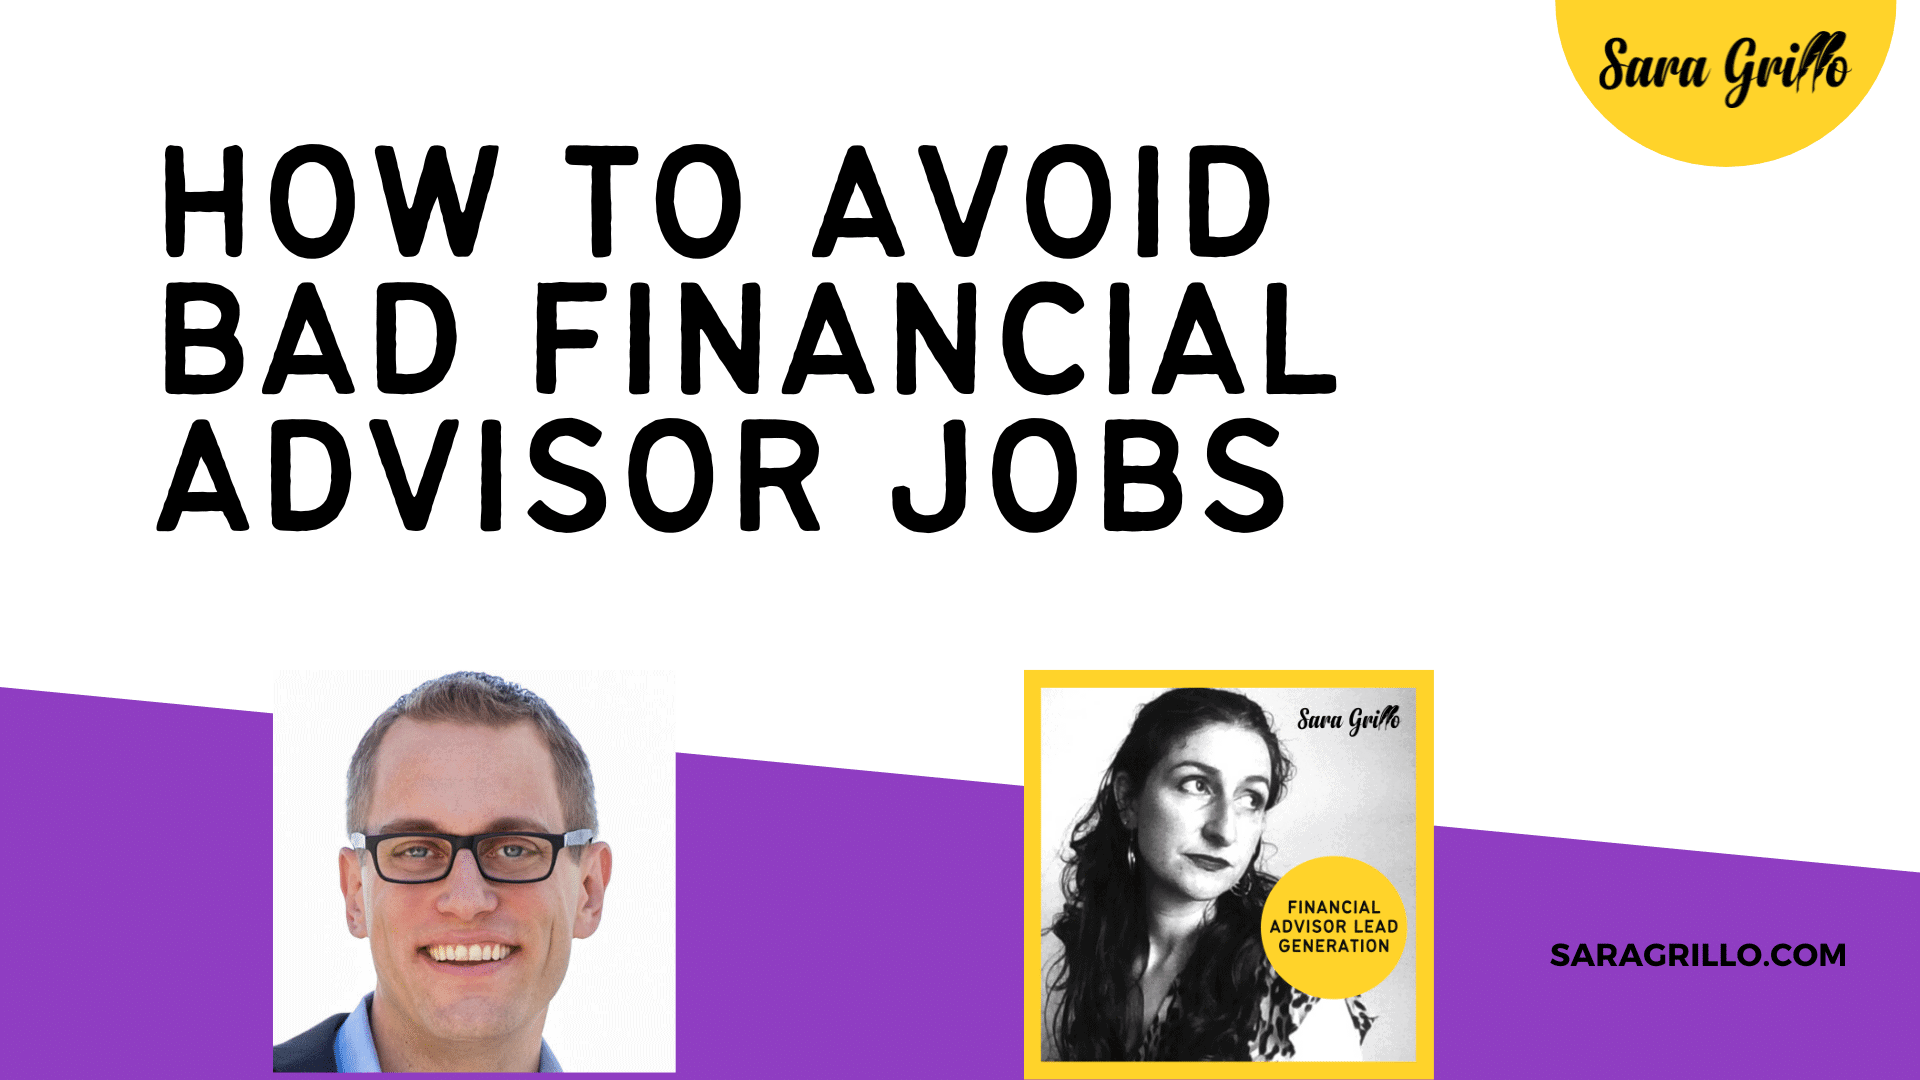 Follow these tips to avoid terrible financial advisors jobs that you will hate!